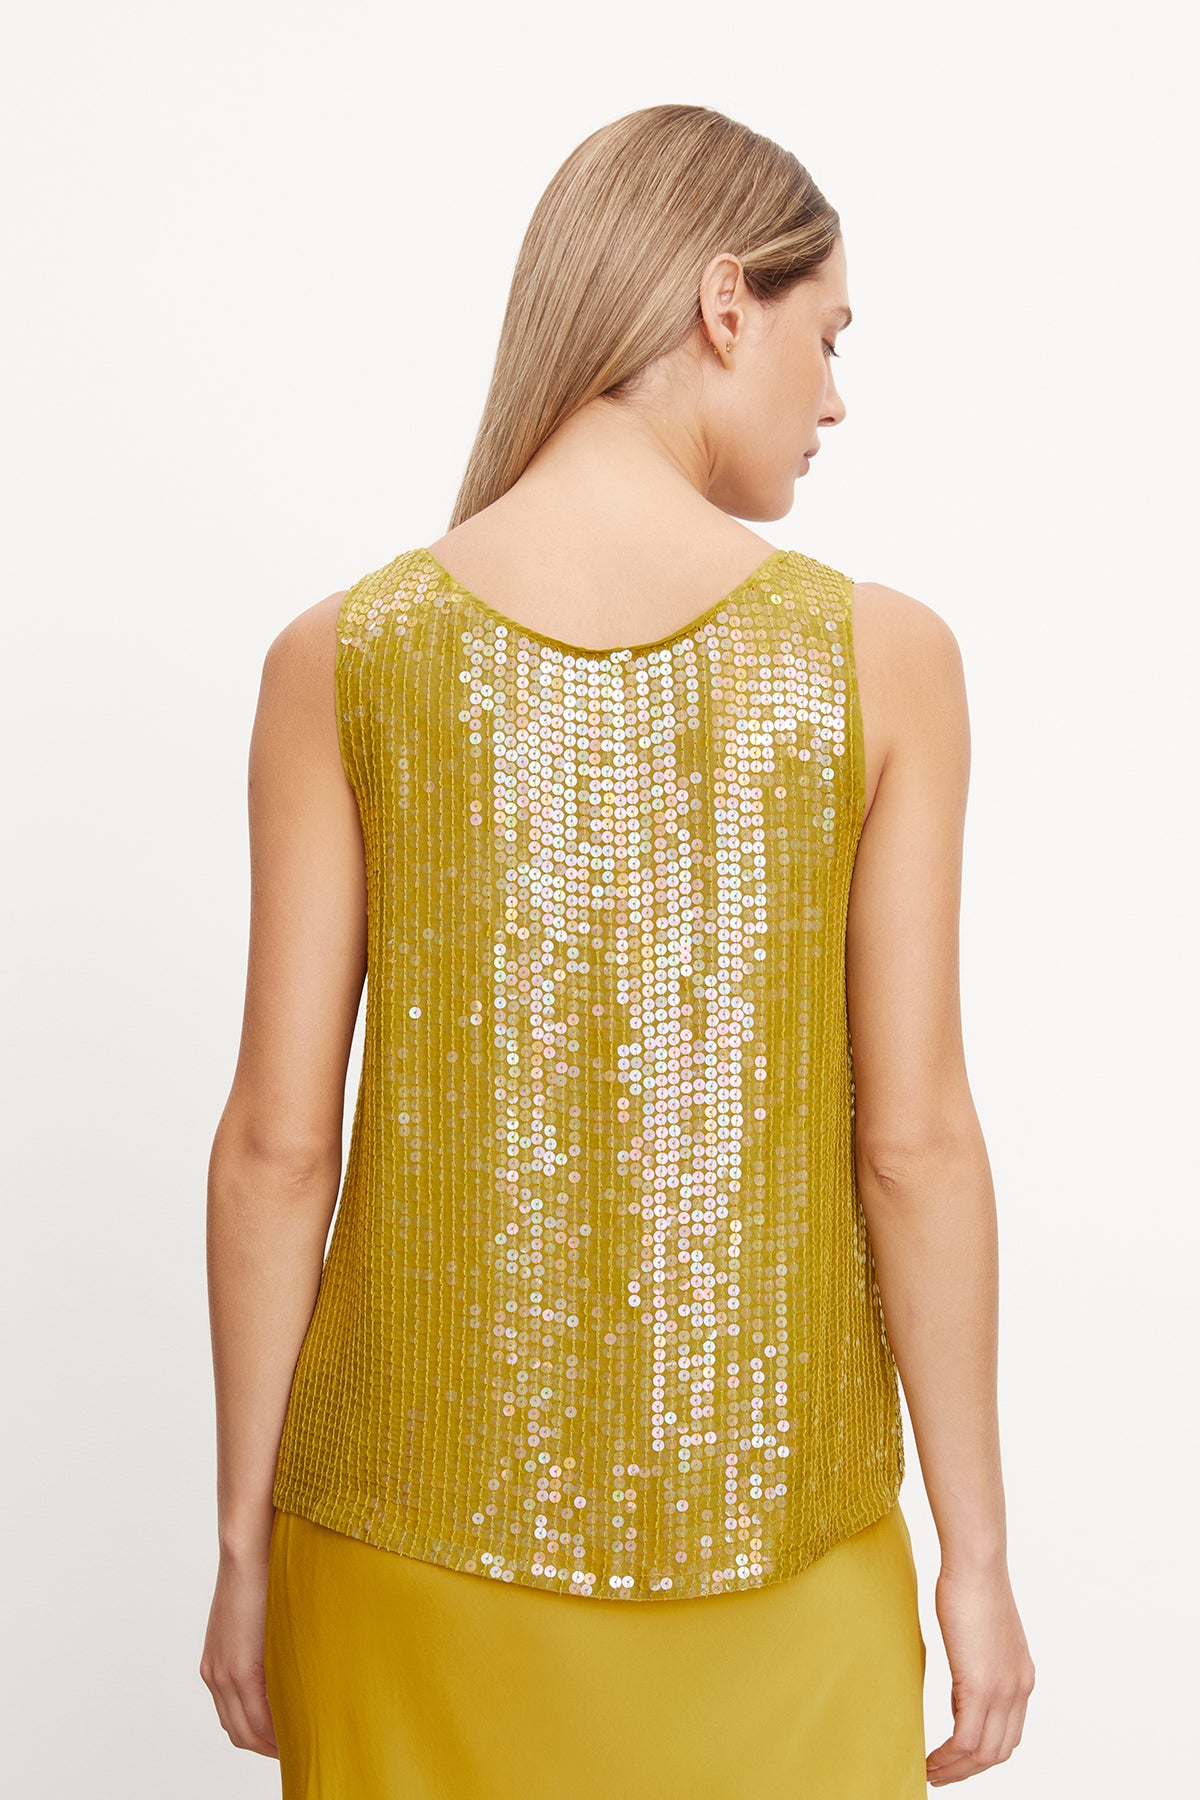   The woman is wearing a BEHATI SEQUIN TANK TOP by Velvet by Graham & Spencer, a yellow sequin top with chic scoop neckline and sequin detailing, showcasing an a-line silhouette from the back view. 